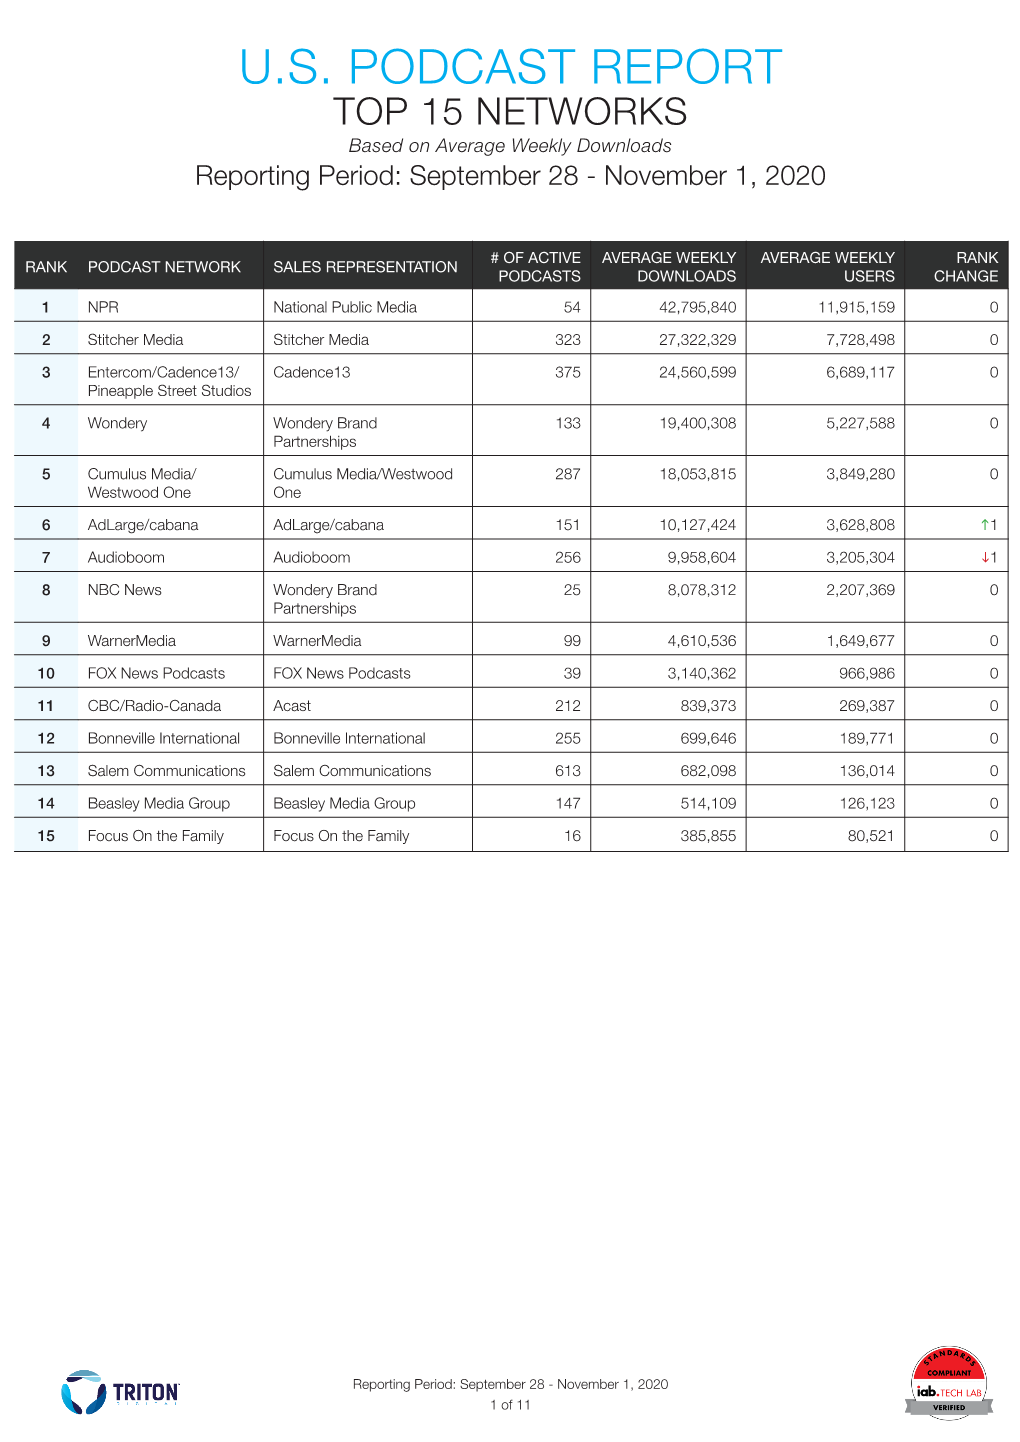 U.S. PODCAST REPORT TOP 15 NETWORKS Based on Average Weekly Downloads Reporting Period: September 28 - November 1, 2020